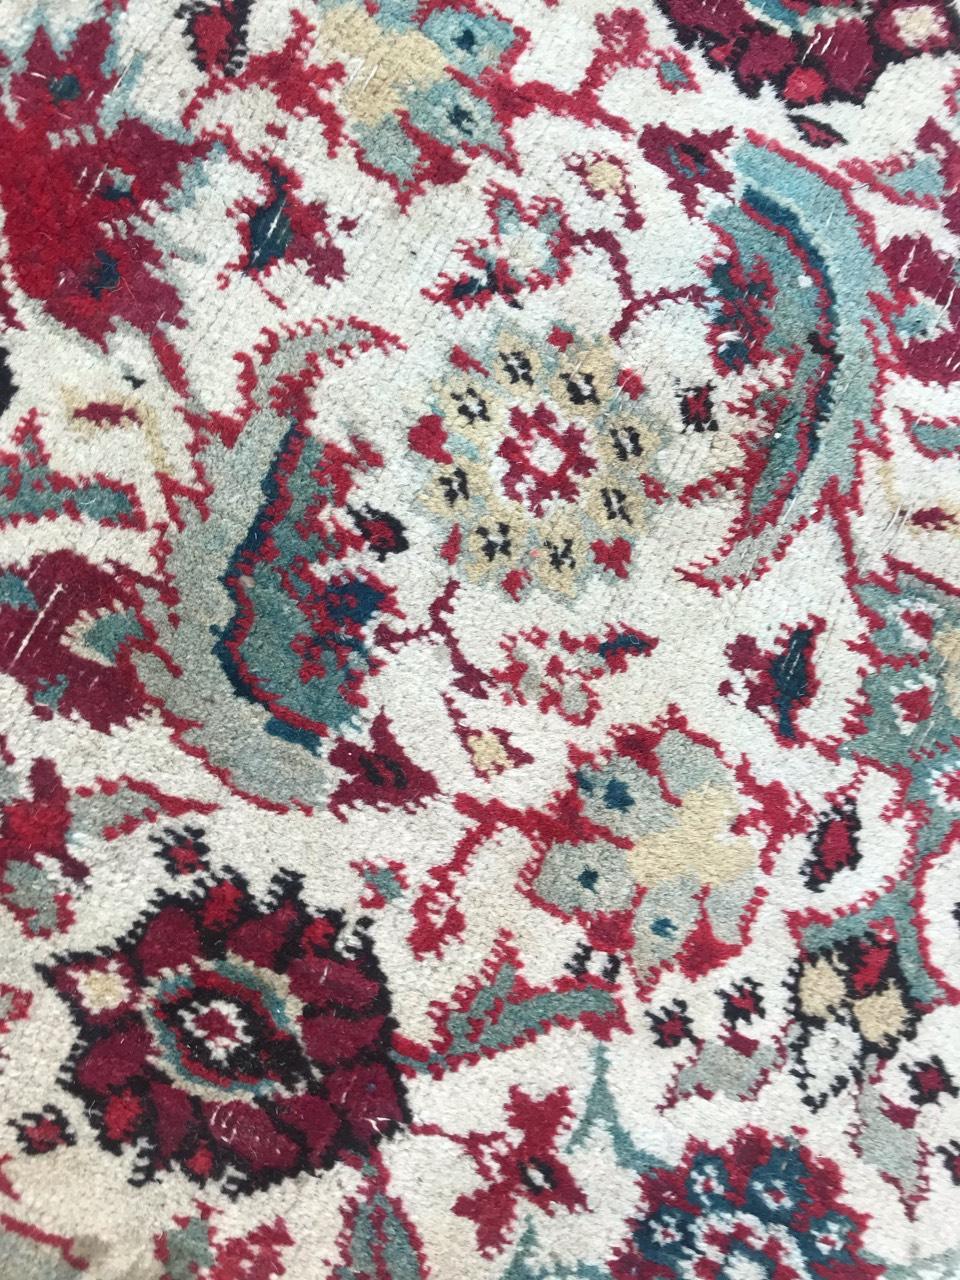 Large Distressed Antique Indian Agra Rug 8